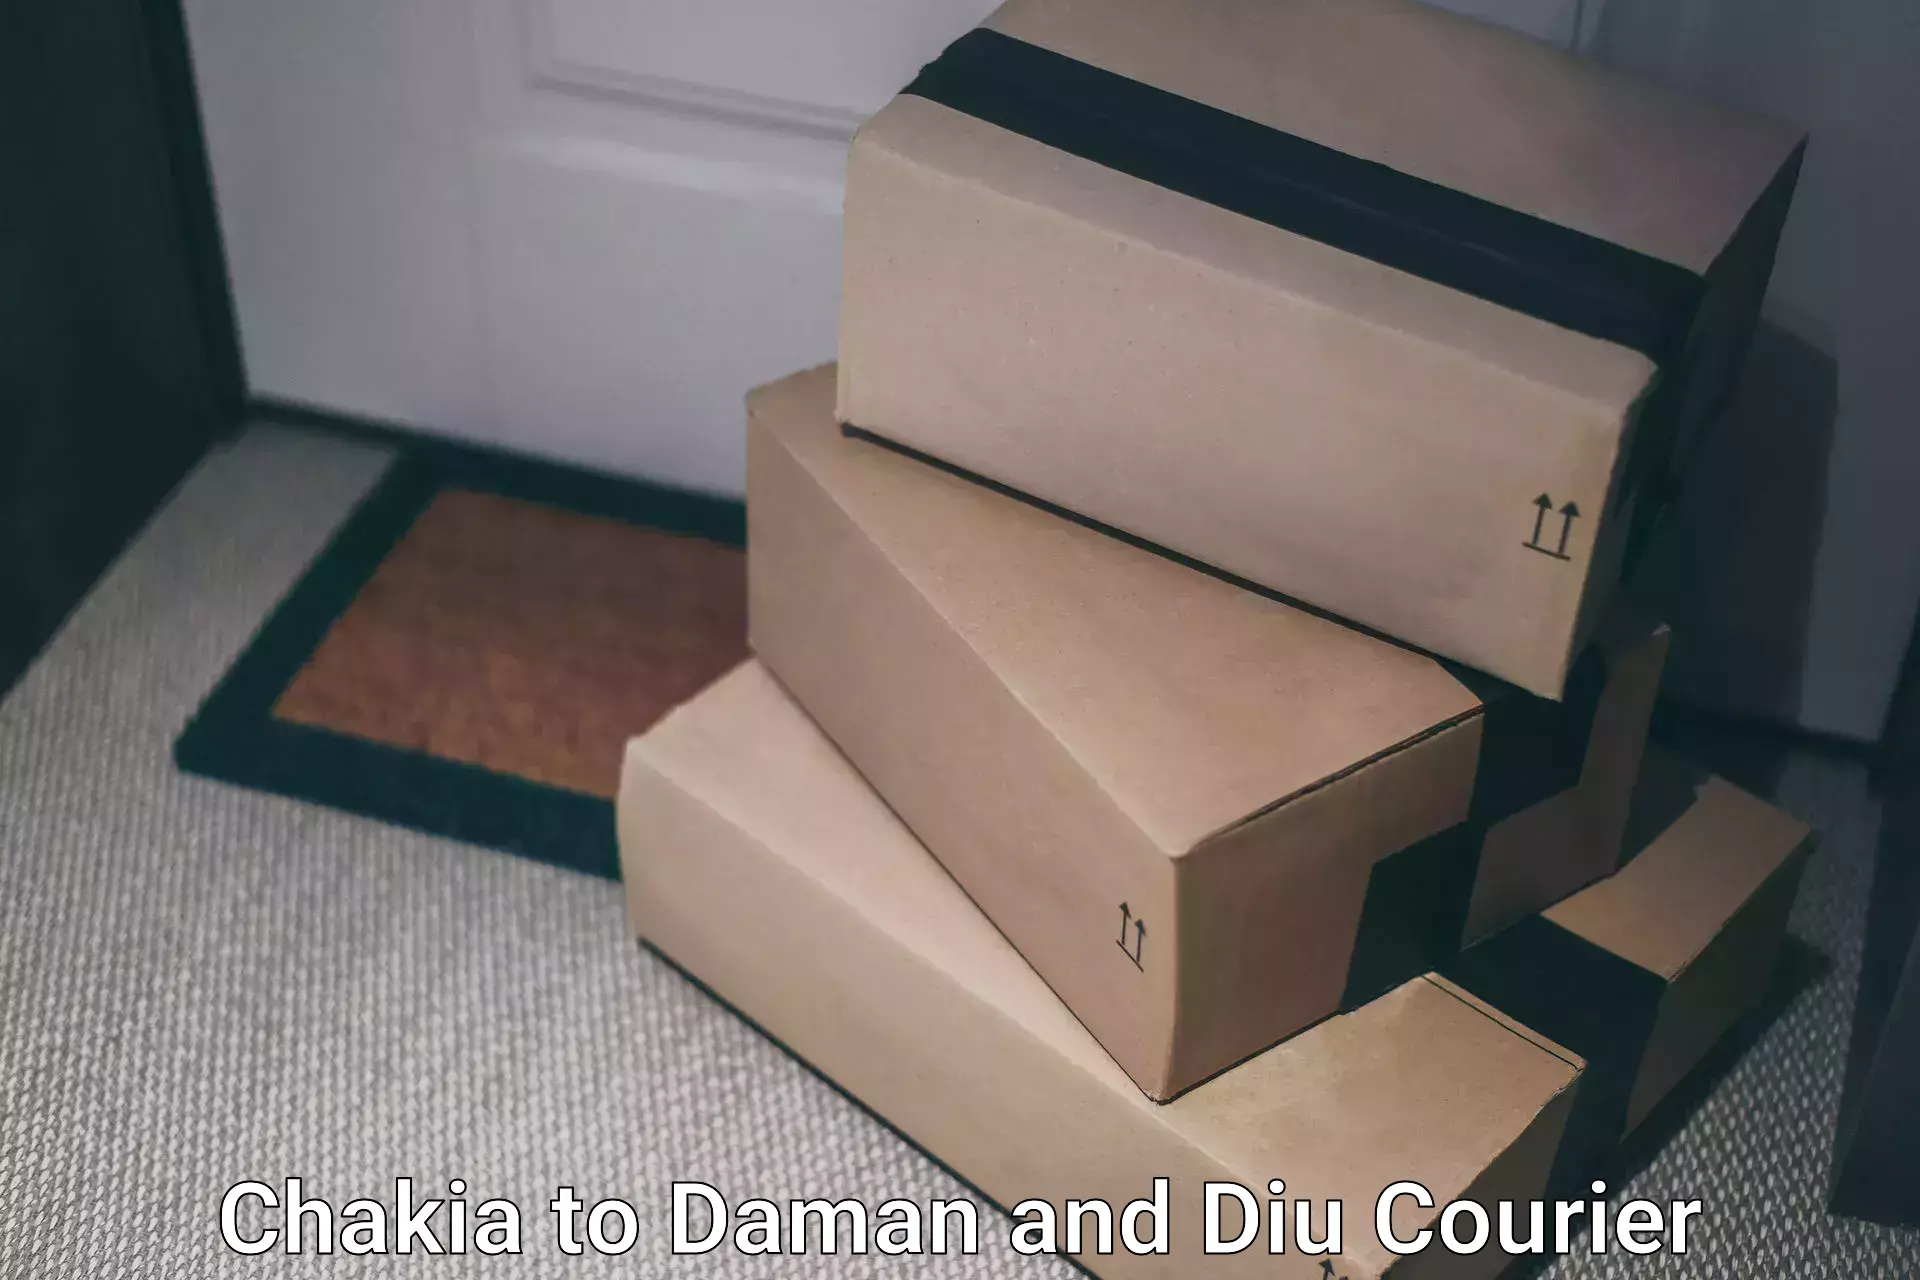 Global courier networks Chakia to Daman and Diu